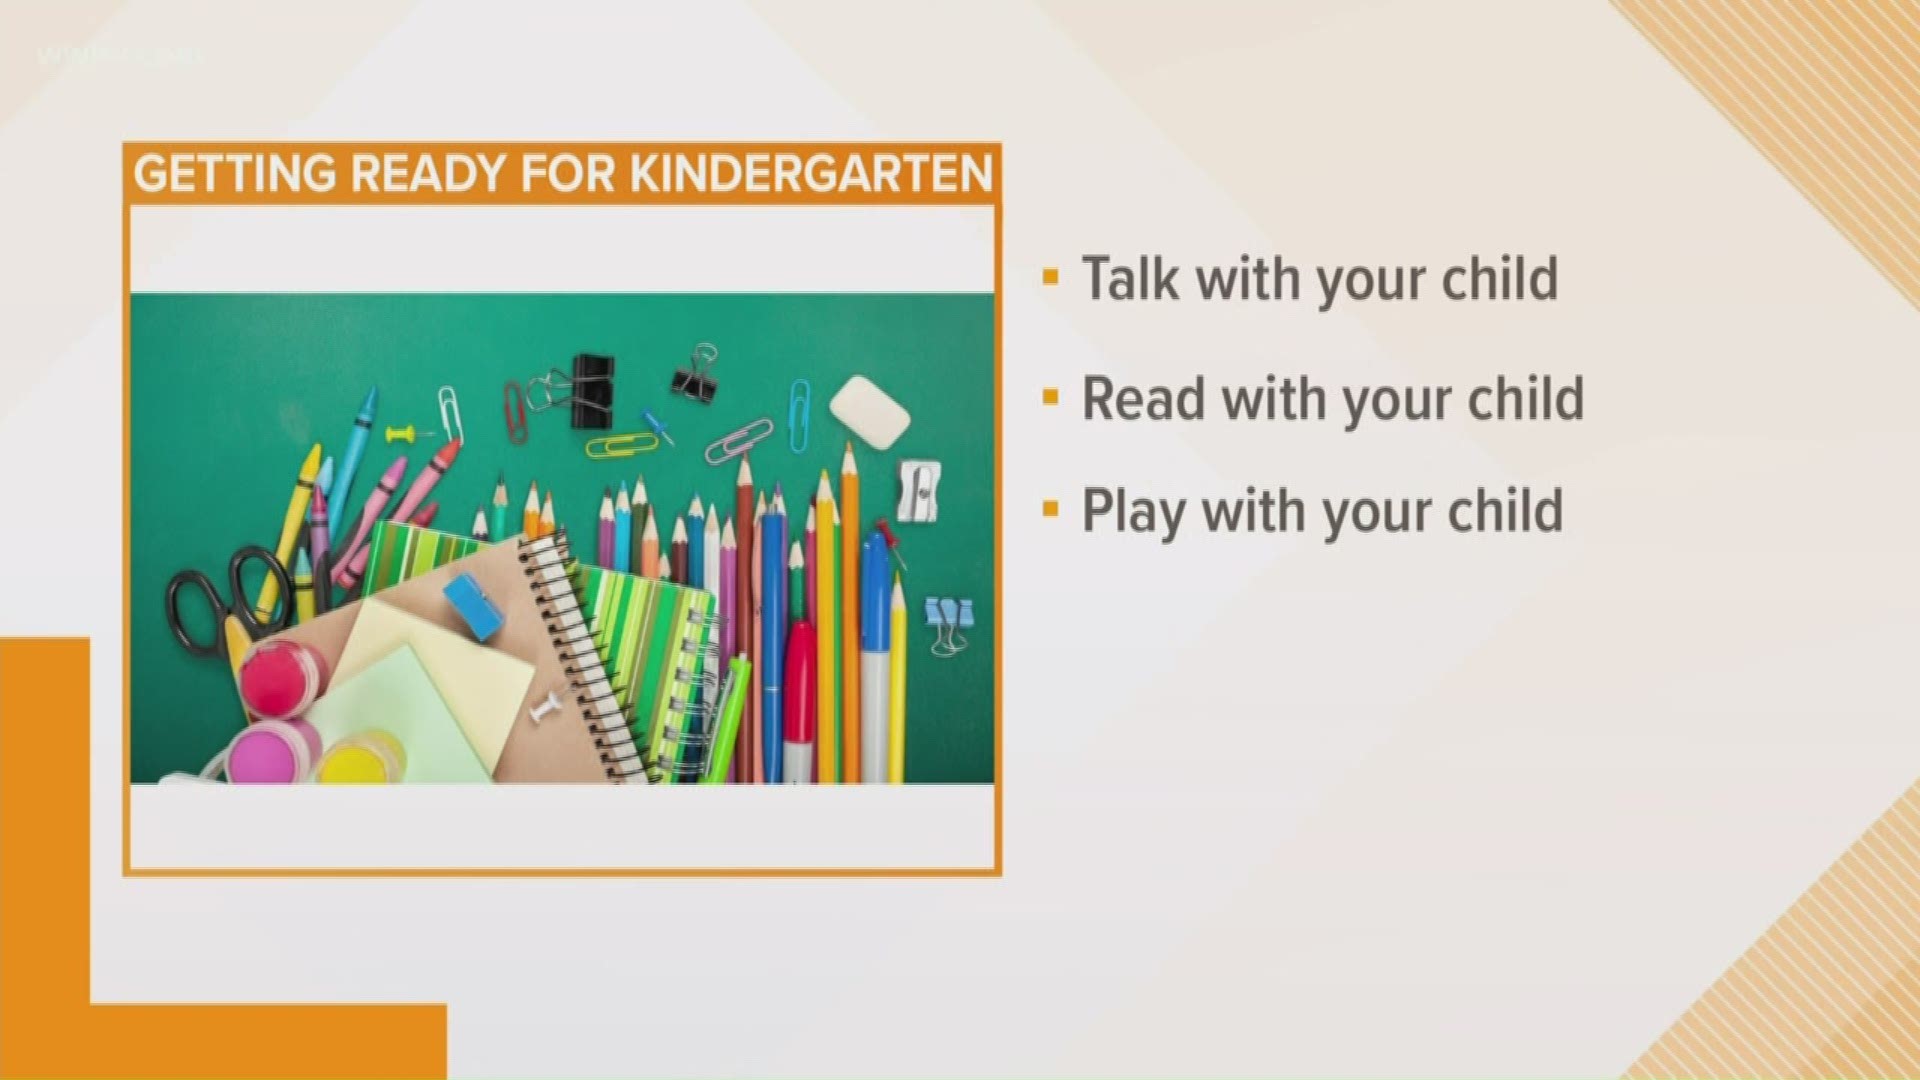 Elyse Shull with the Parenting Center has some great advice for getting your child ready to start school.